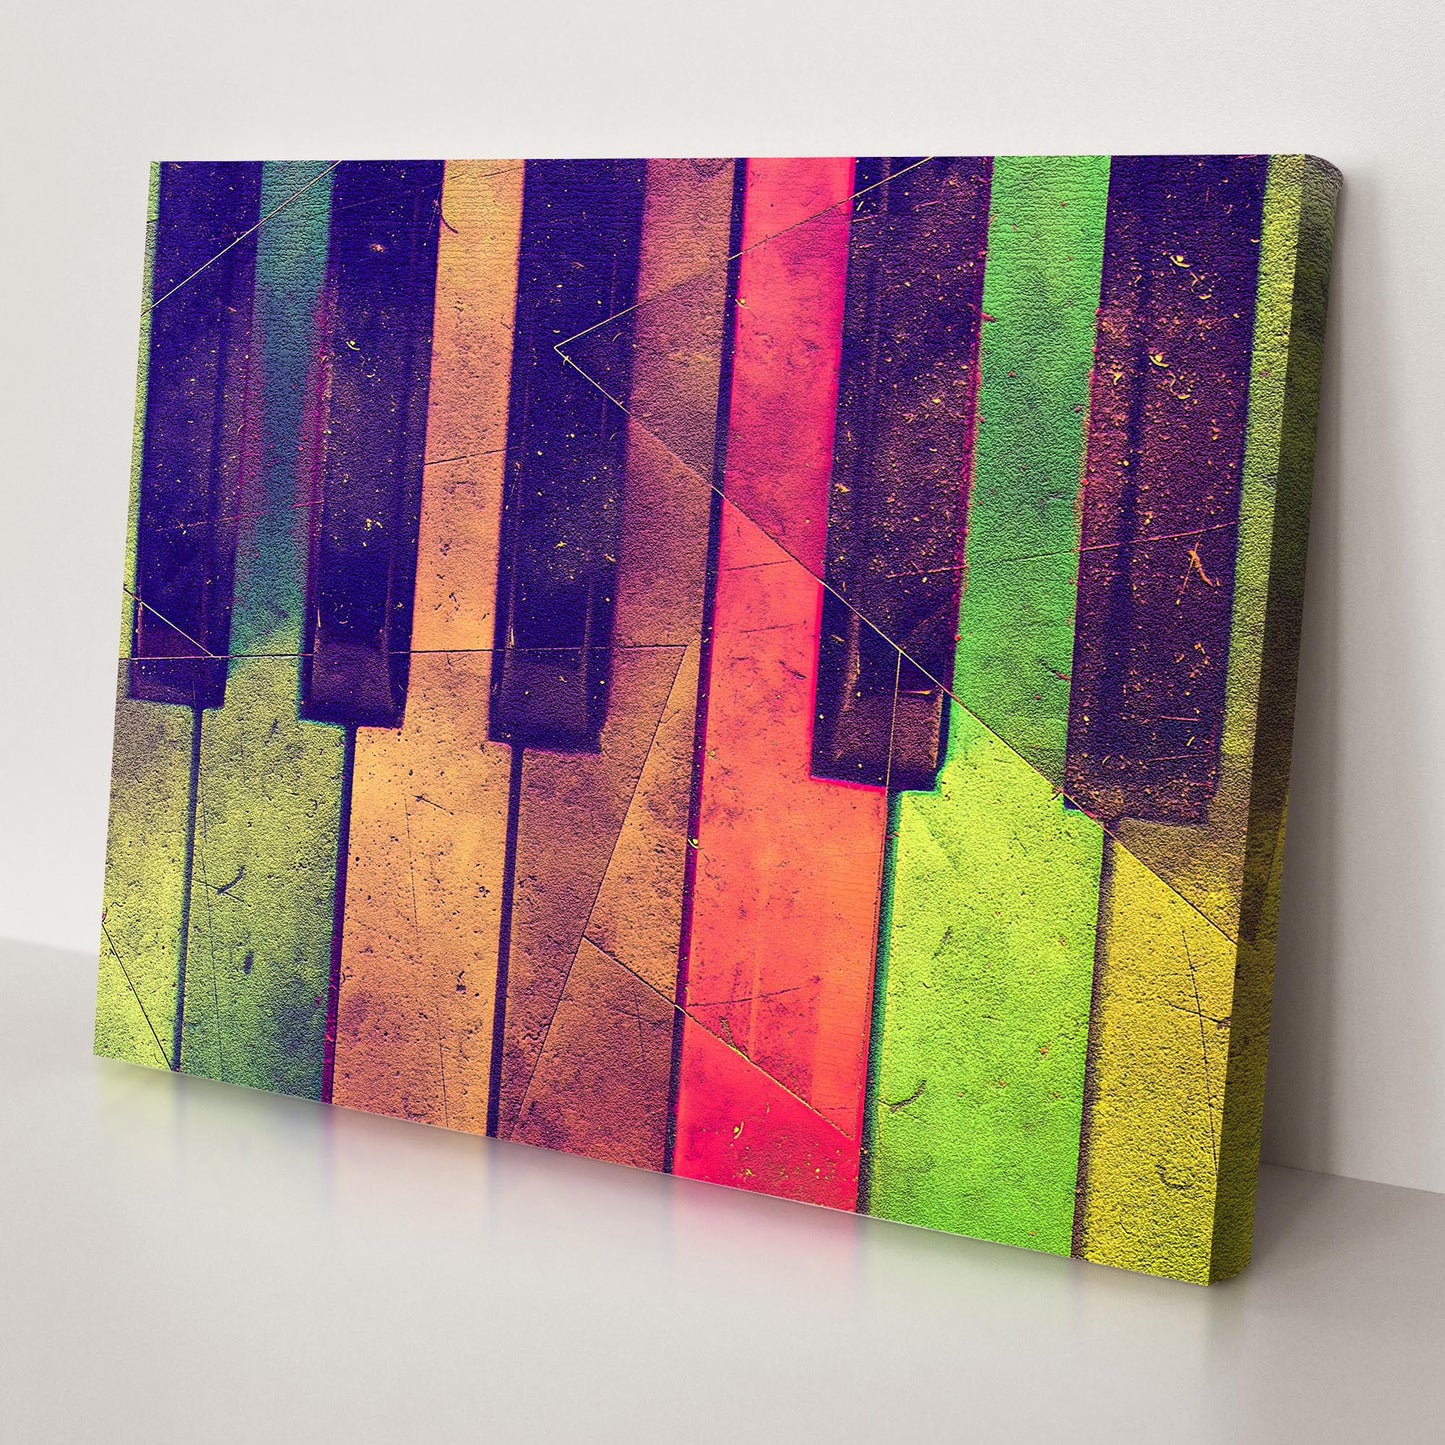 Keyboard Retro Canvas Wall Art - Image by Tailored Canvases